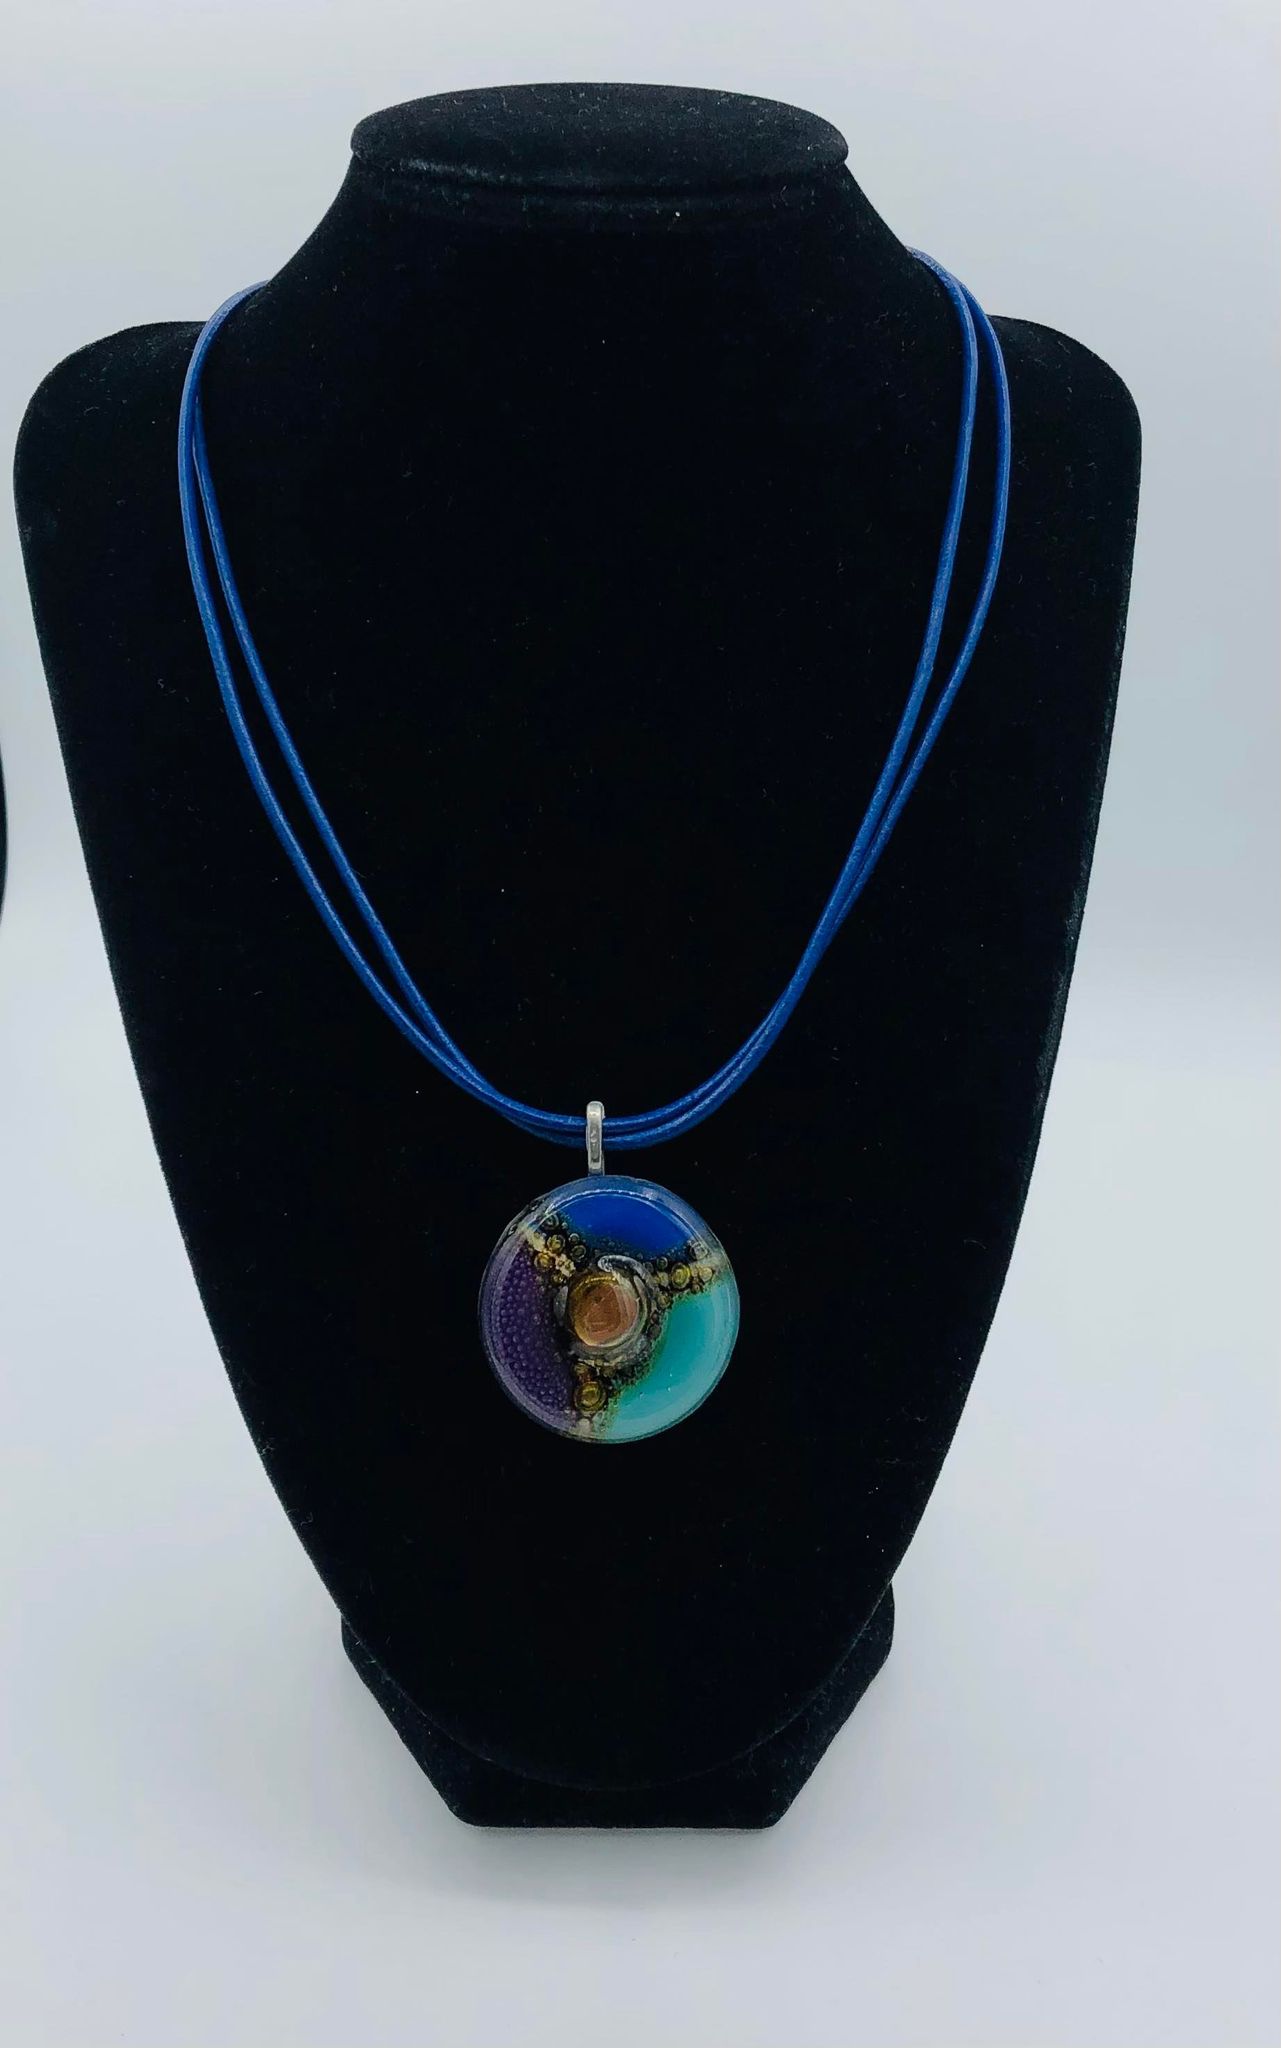 Cristalida Short Necklace / Fused Glass, Leather Cords / Blue, Purple / Round Small Pendant 1.25 Inches / Candy Necklace - 0